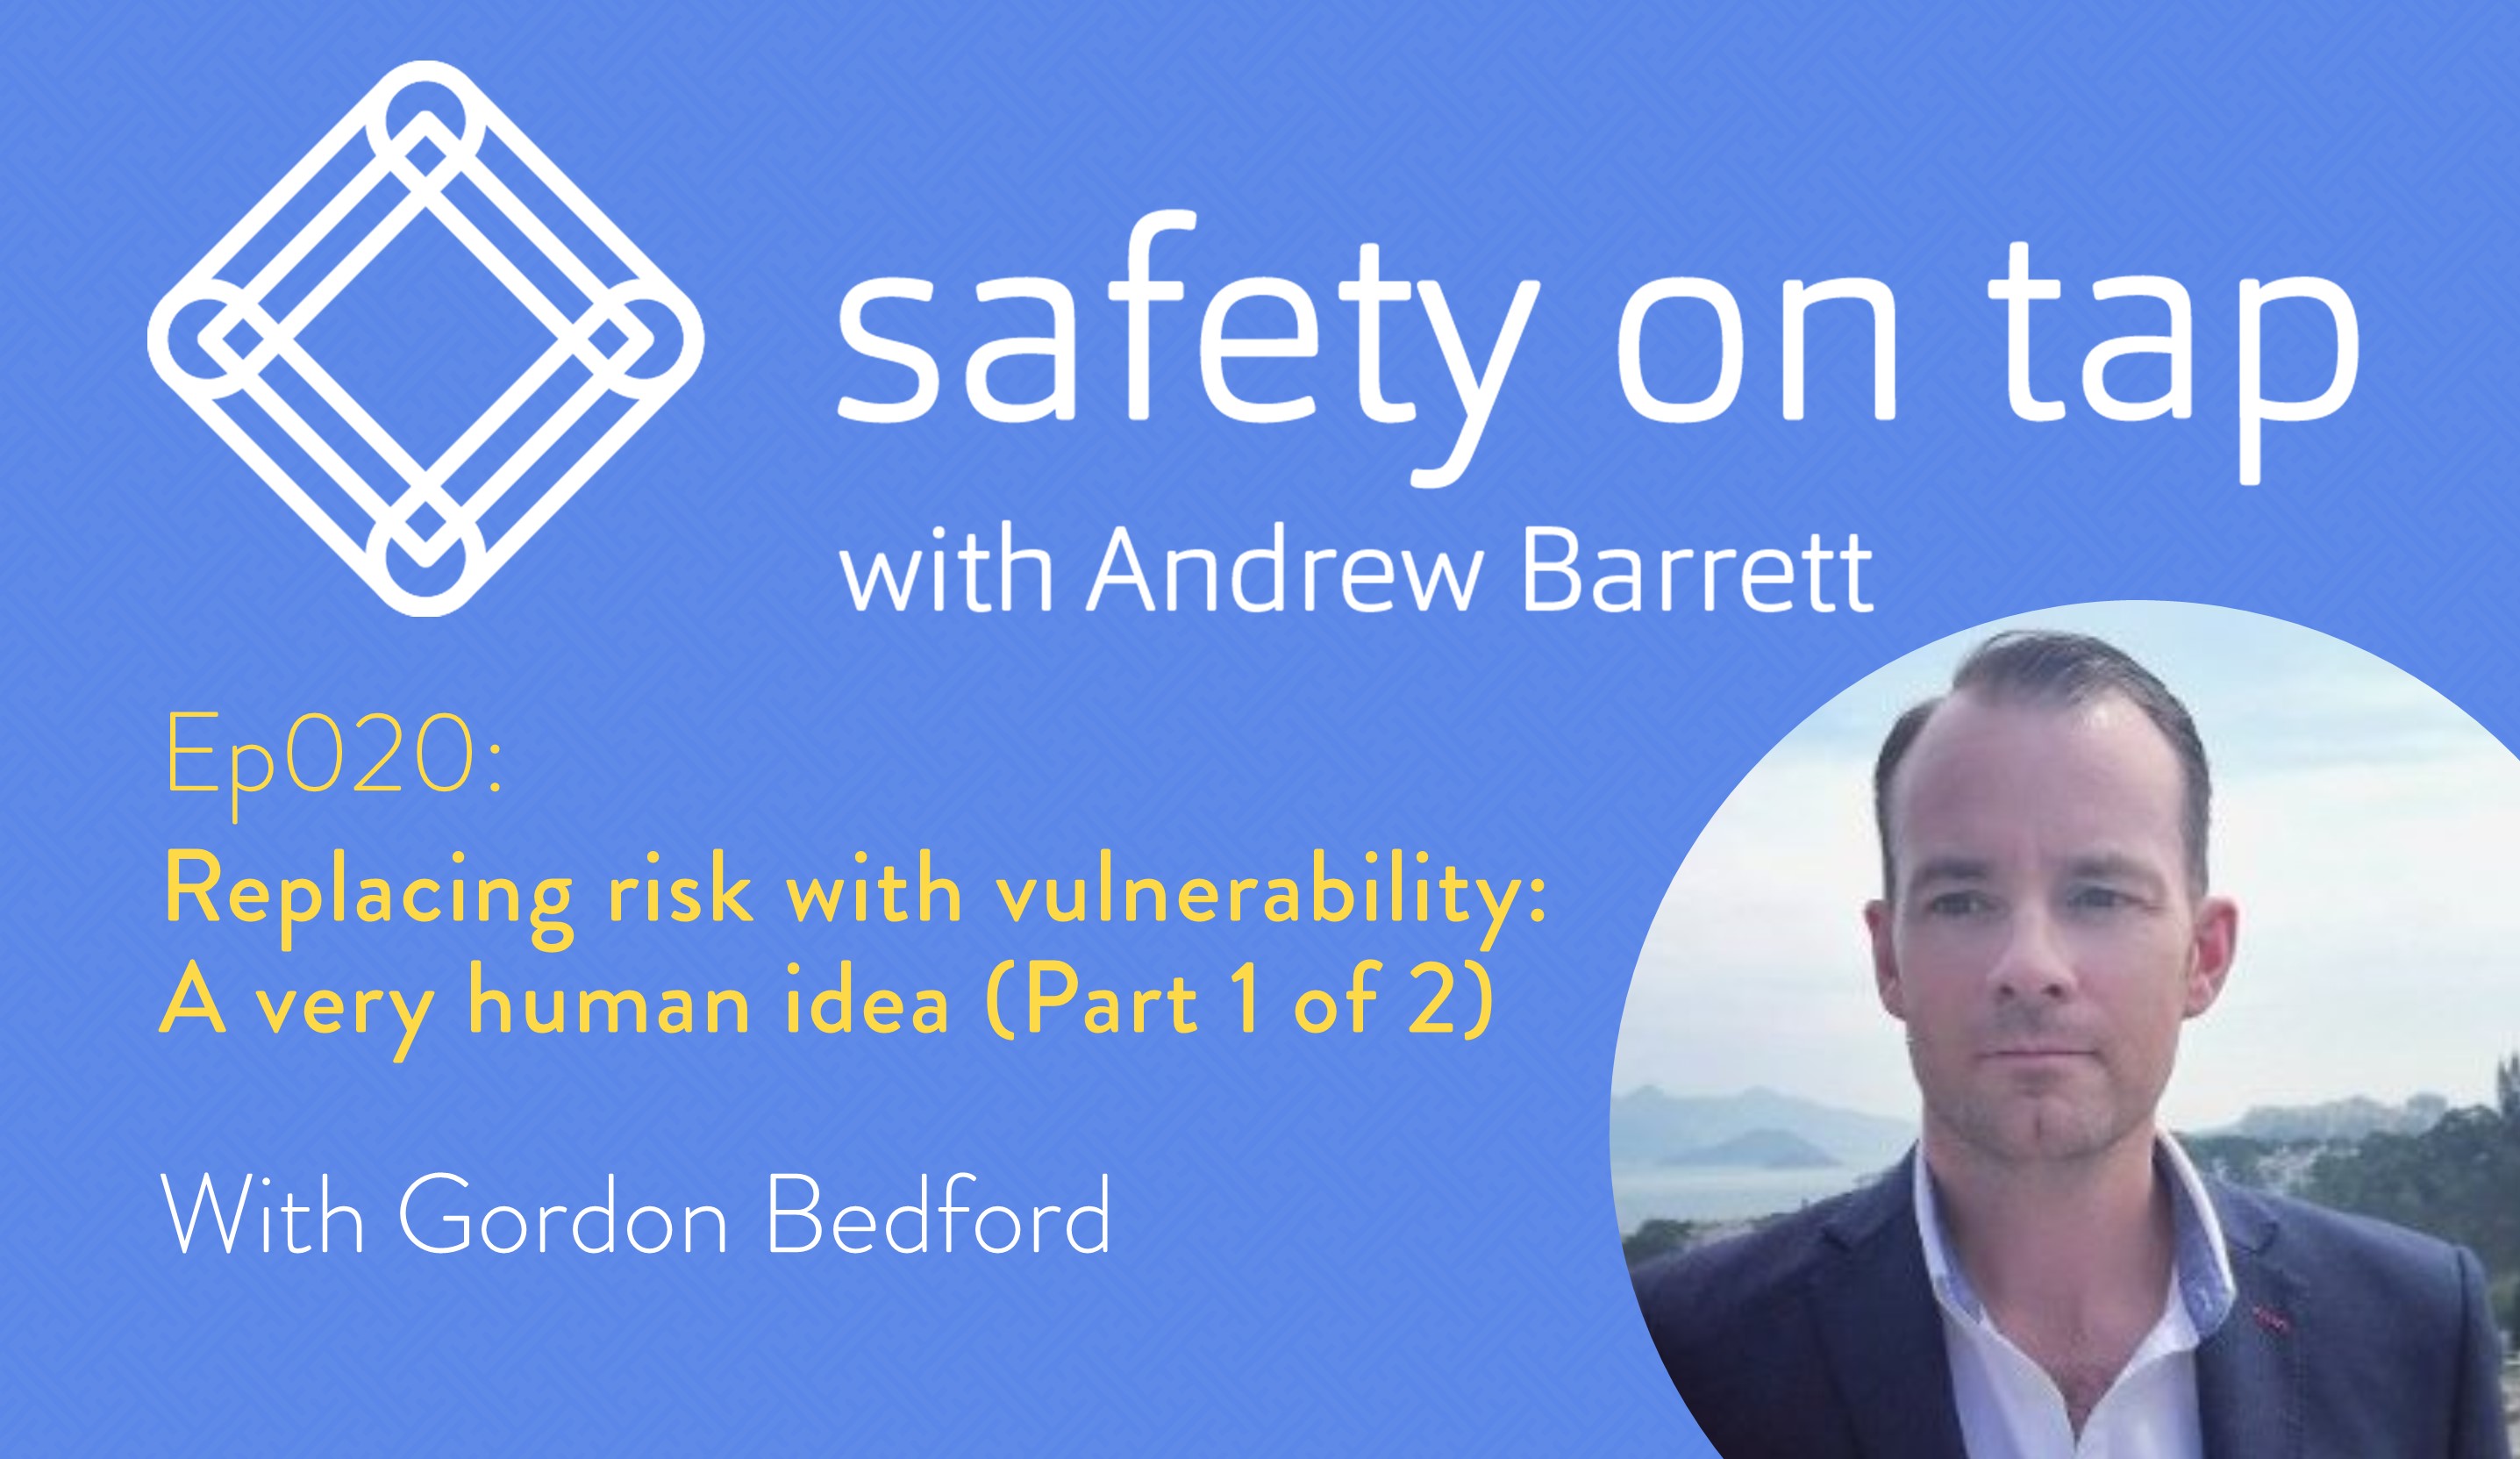 Ep020: Replacing risk with vulnerability: A very human idea, with Gordon Bedford (Part 1 of 2)